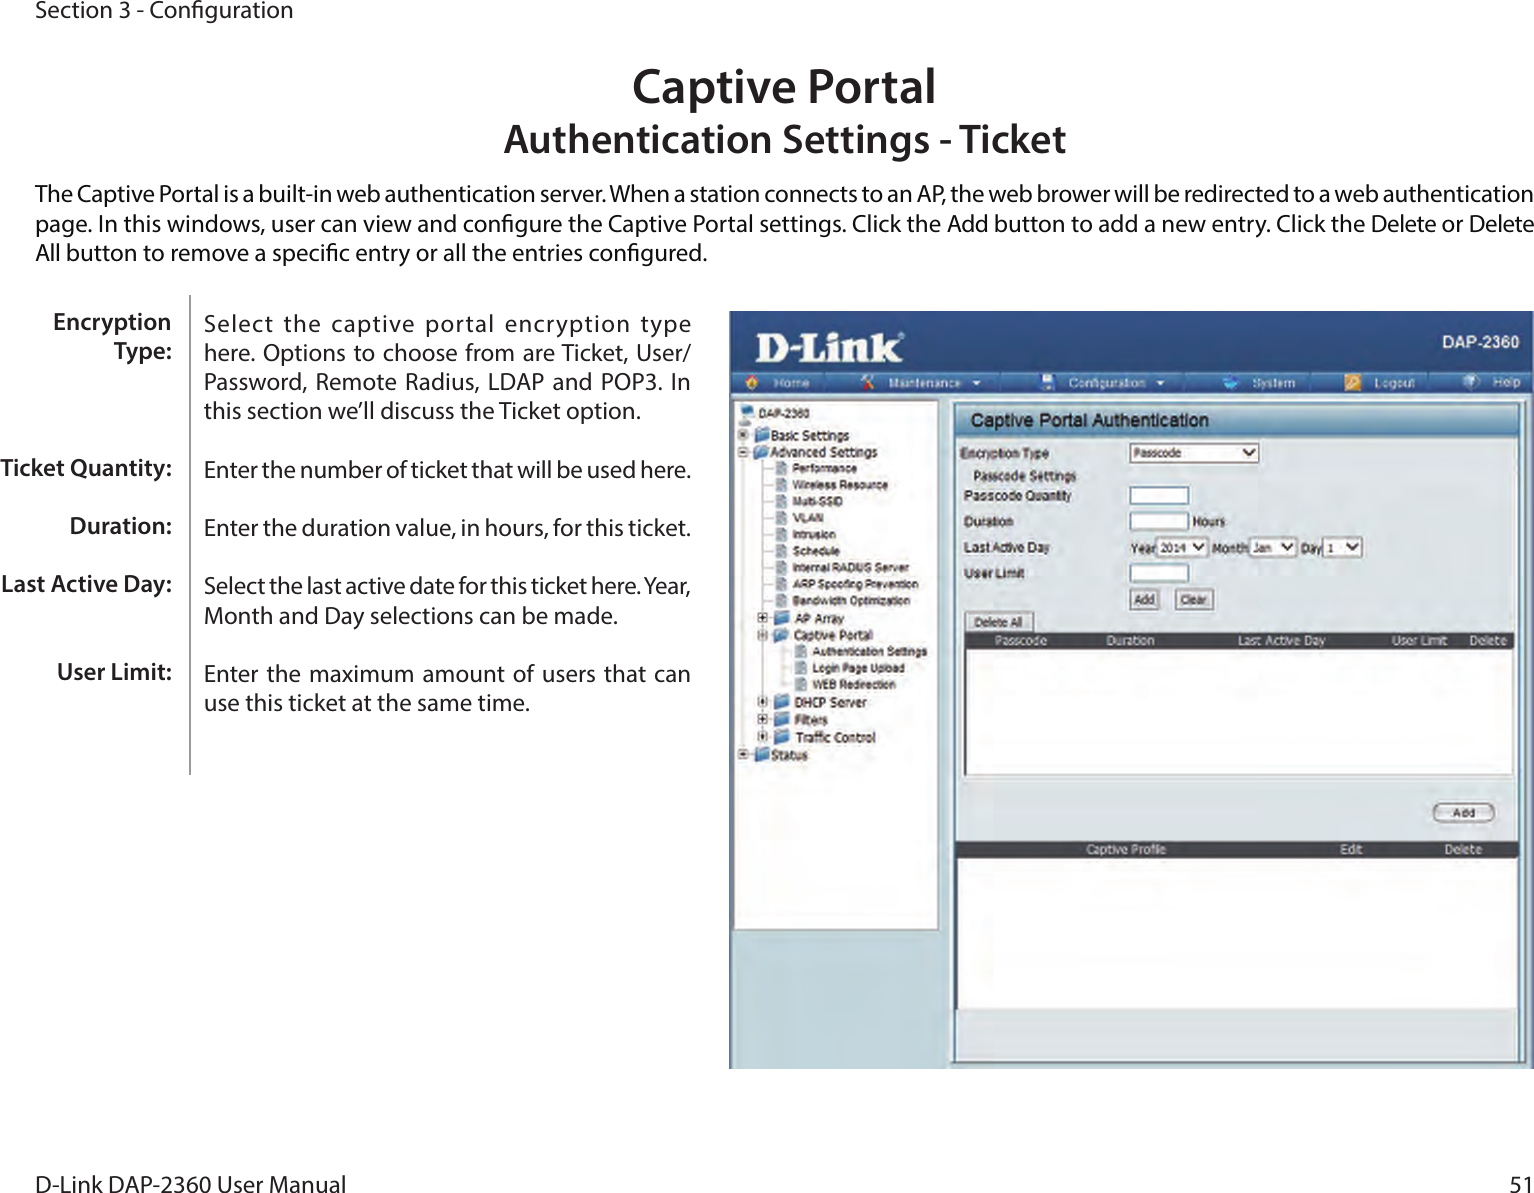 51D-Link DAP-2360 User ManualSection 3 - CongurationCaptive Portal Authentication Settings - TicketThe Captive Portal is a built-in web authentication server. When a station connects to an AP, the web brower will be redirected to a web authentication page. In this windows, user can view and congure the Captive Portal settings. Click the Add button to add a new entry. Click the Delete or Delete All button to remove a specic entry or all the entries congured.Select  the captive  portal  encryption type here. Options to choose from are Ticket, User/Password, Remote Radius,  LDAP and POP3.  In this section we’ll discuss the Ticket option.Enter the number of ticket that will be used here.Enter the duration value, in hours, for this ticket.Select the last active date for this ticket here. Year, Month and Day selections can be made.Enter the maximum amount of users that can use this ticket at the same time.Encryption Type:Ticket Quantity:Duration:Last Active Day:User Limit: